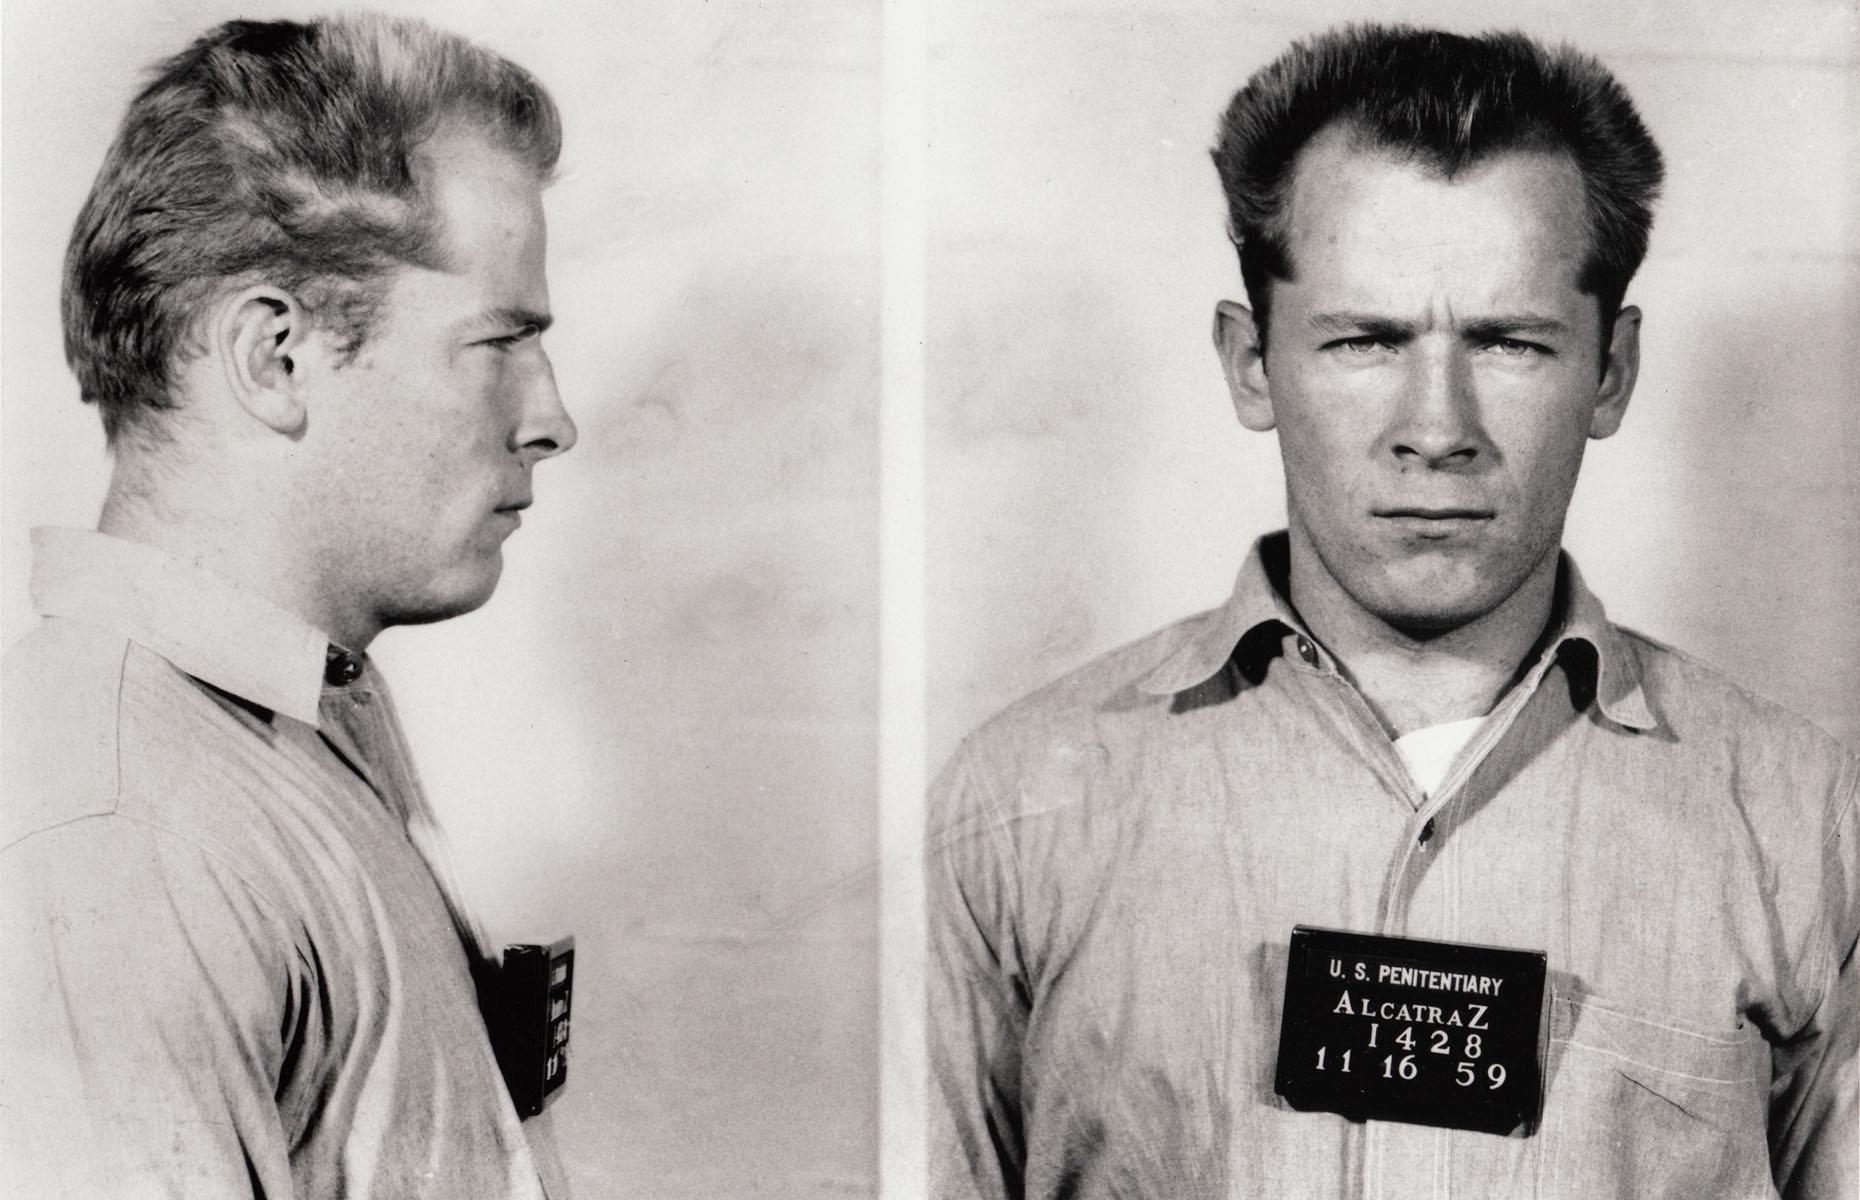 <p>One of the more recent criminals to arrive on Alcatraz's shores, James 'Whitey' Bulger only died in 2018. He was a notorious organised crime boss who led the Boston-area Winter Hill Gang, and had reportedly also been a high-level FBI informant starting in the mid-1970s. He spent a brief period in Alcatraz starting in 1959, but was later out of prison for 46 years. When he was eventually arrested again in 2011, the charges included 19 murders.</p>